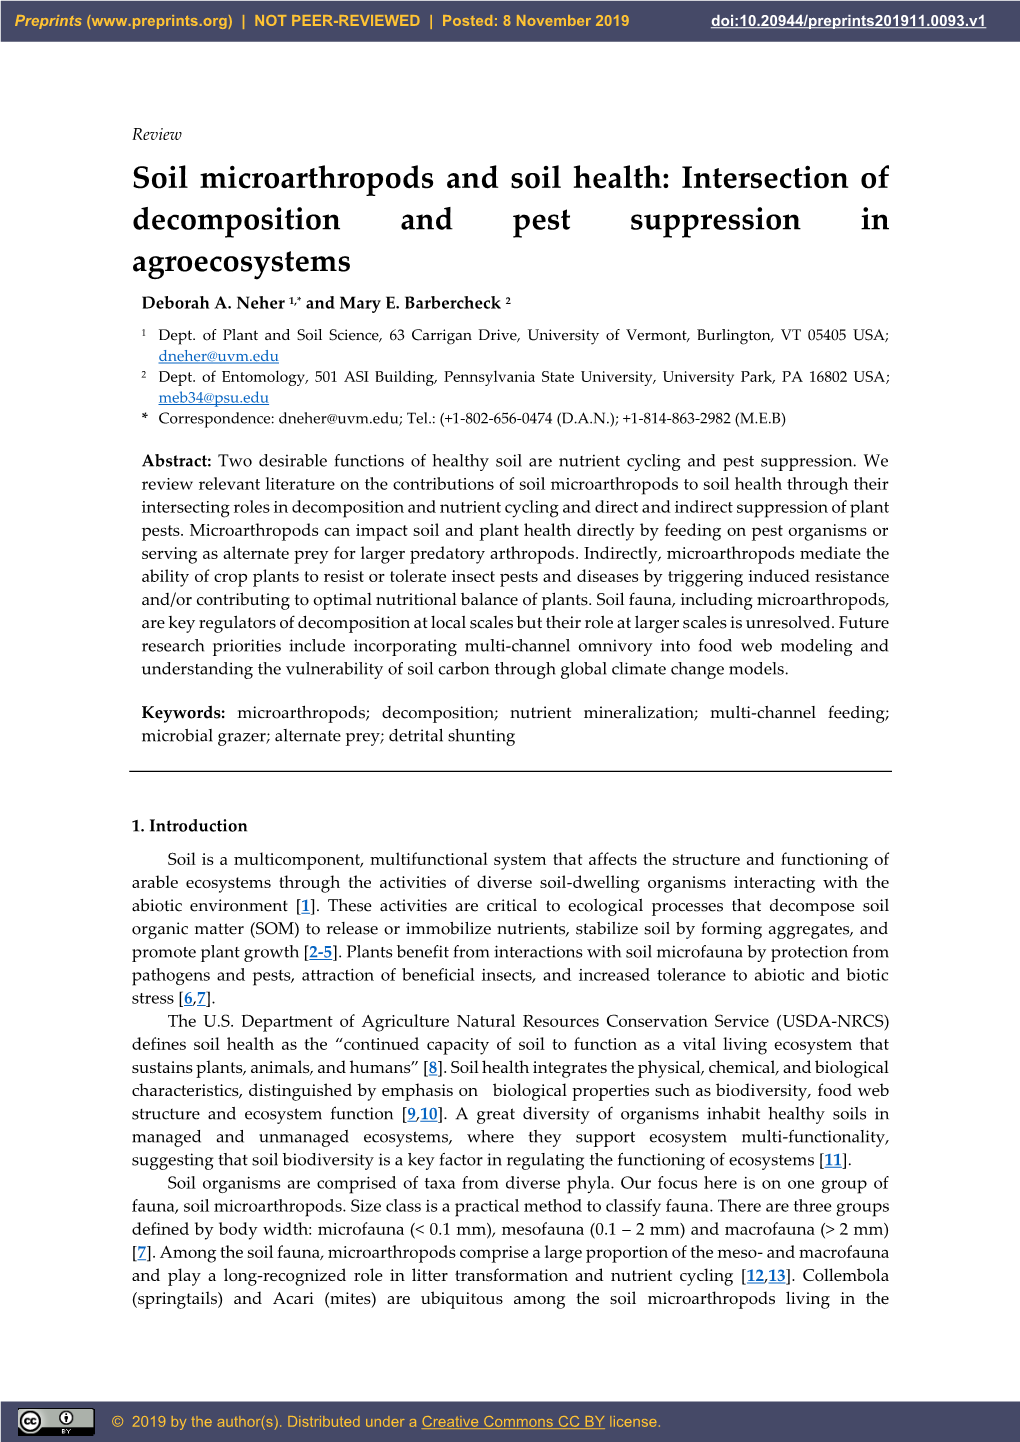 Intersection of Decomposition and Pest Suppression in Agroecosystems